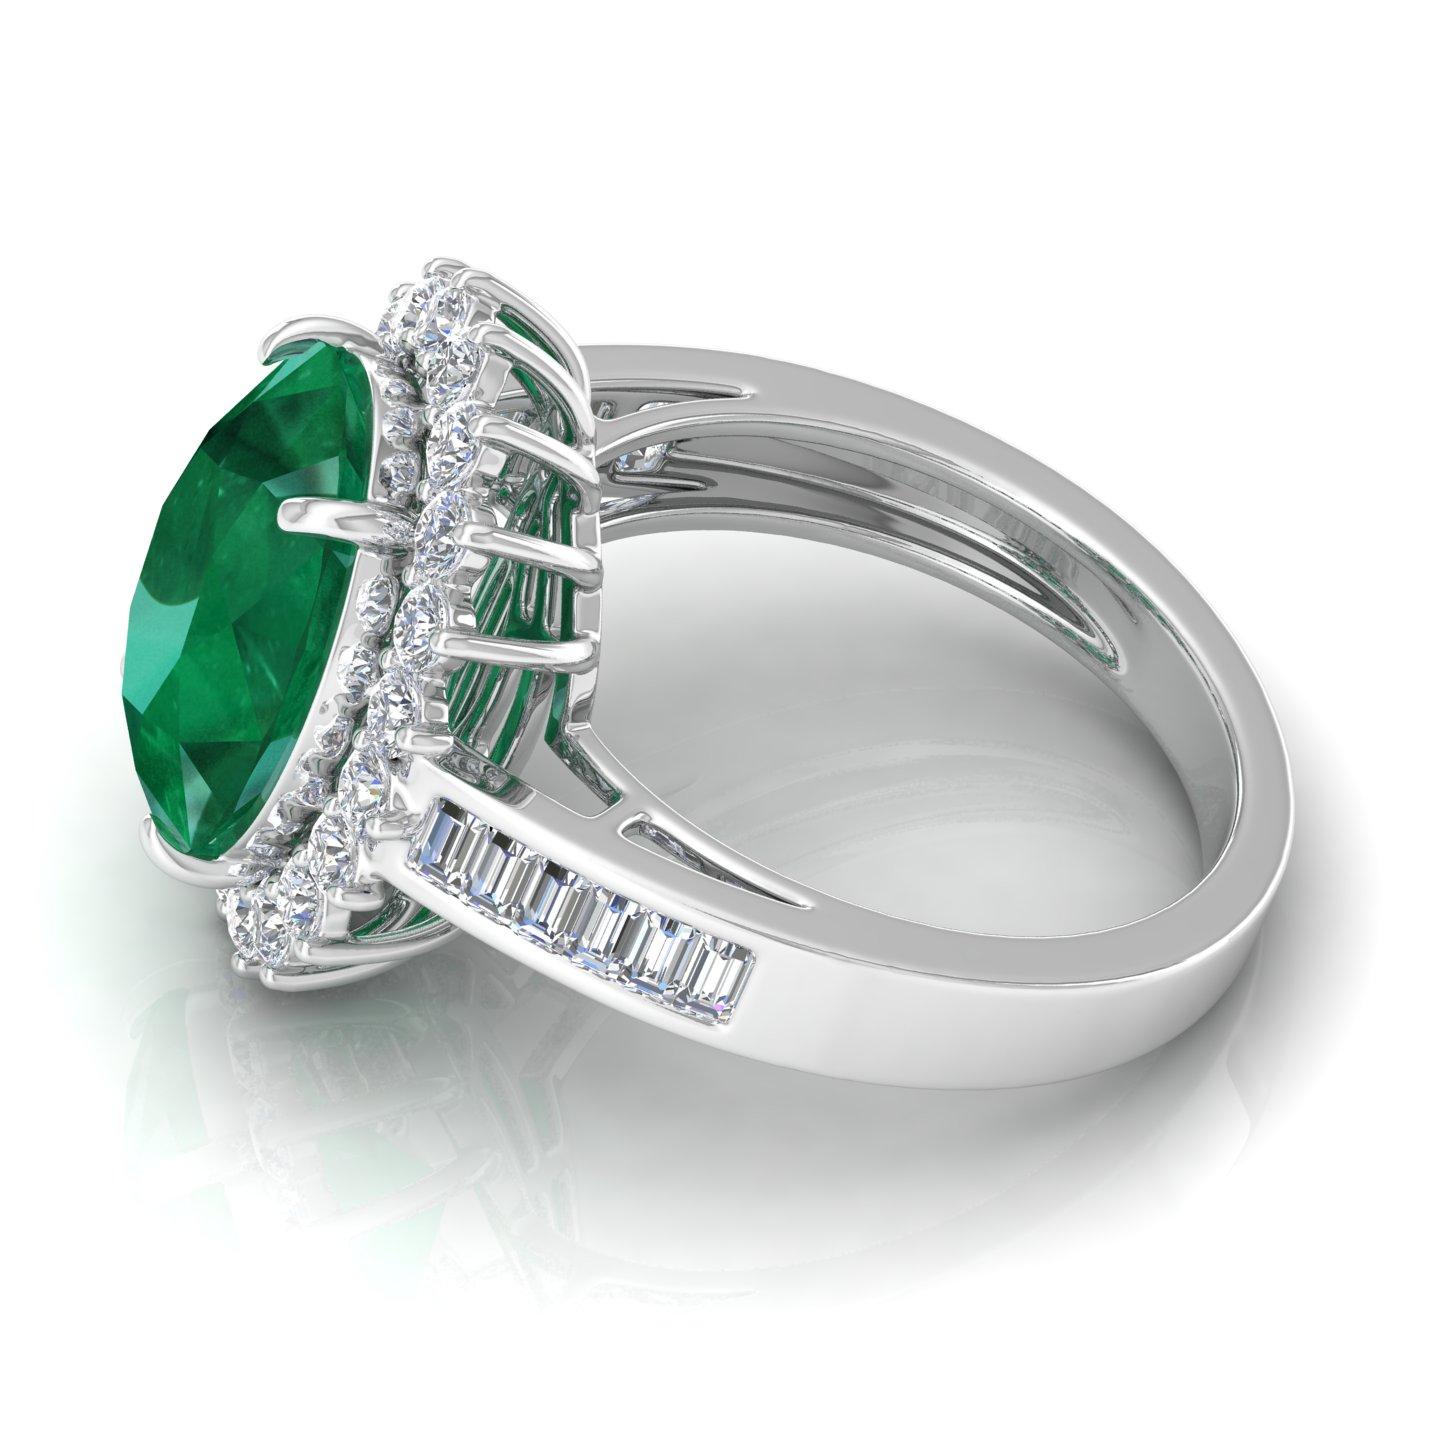 For Sale:  Oval Natural Emerald Gemstone Cocktail Ring Diamond 10 Karat White Gold Jewelry 5